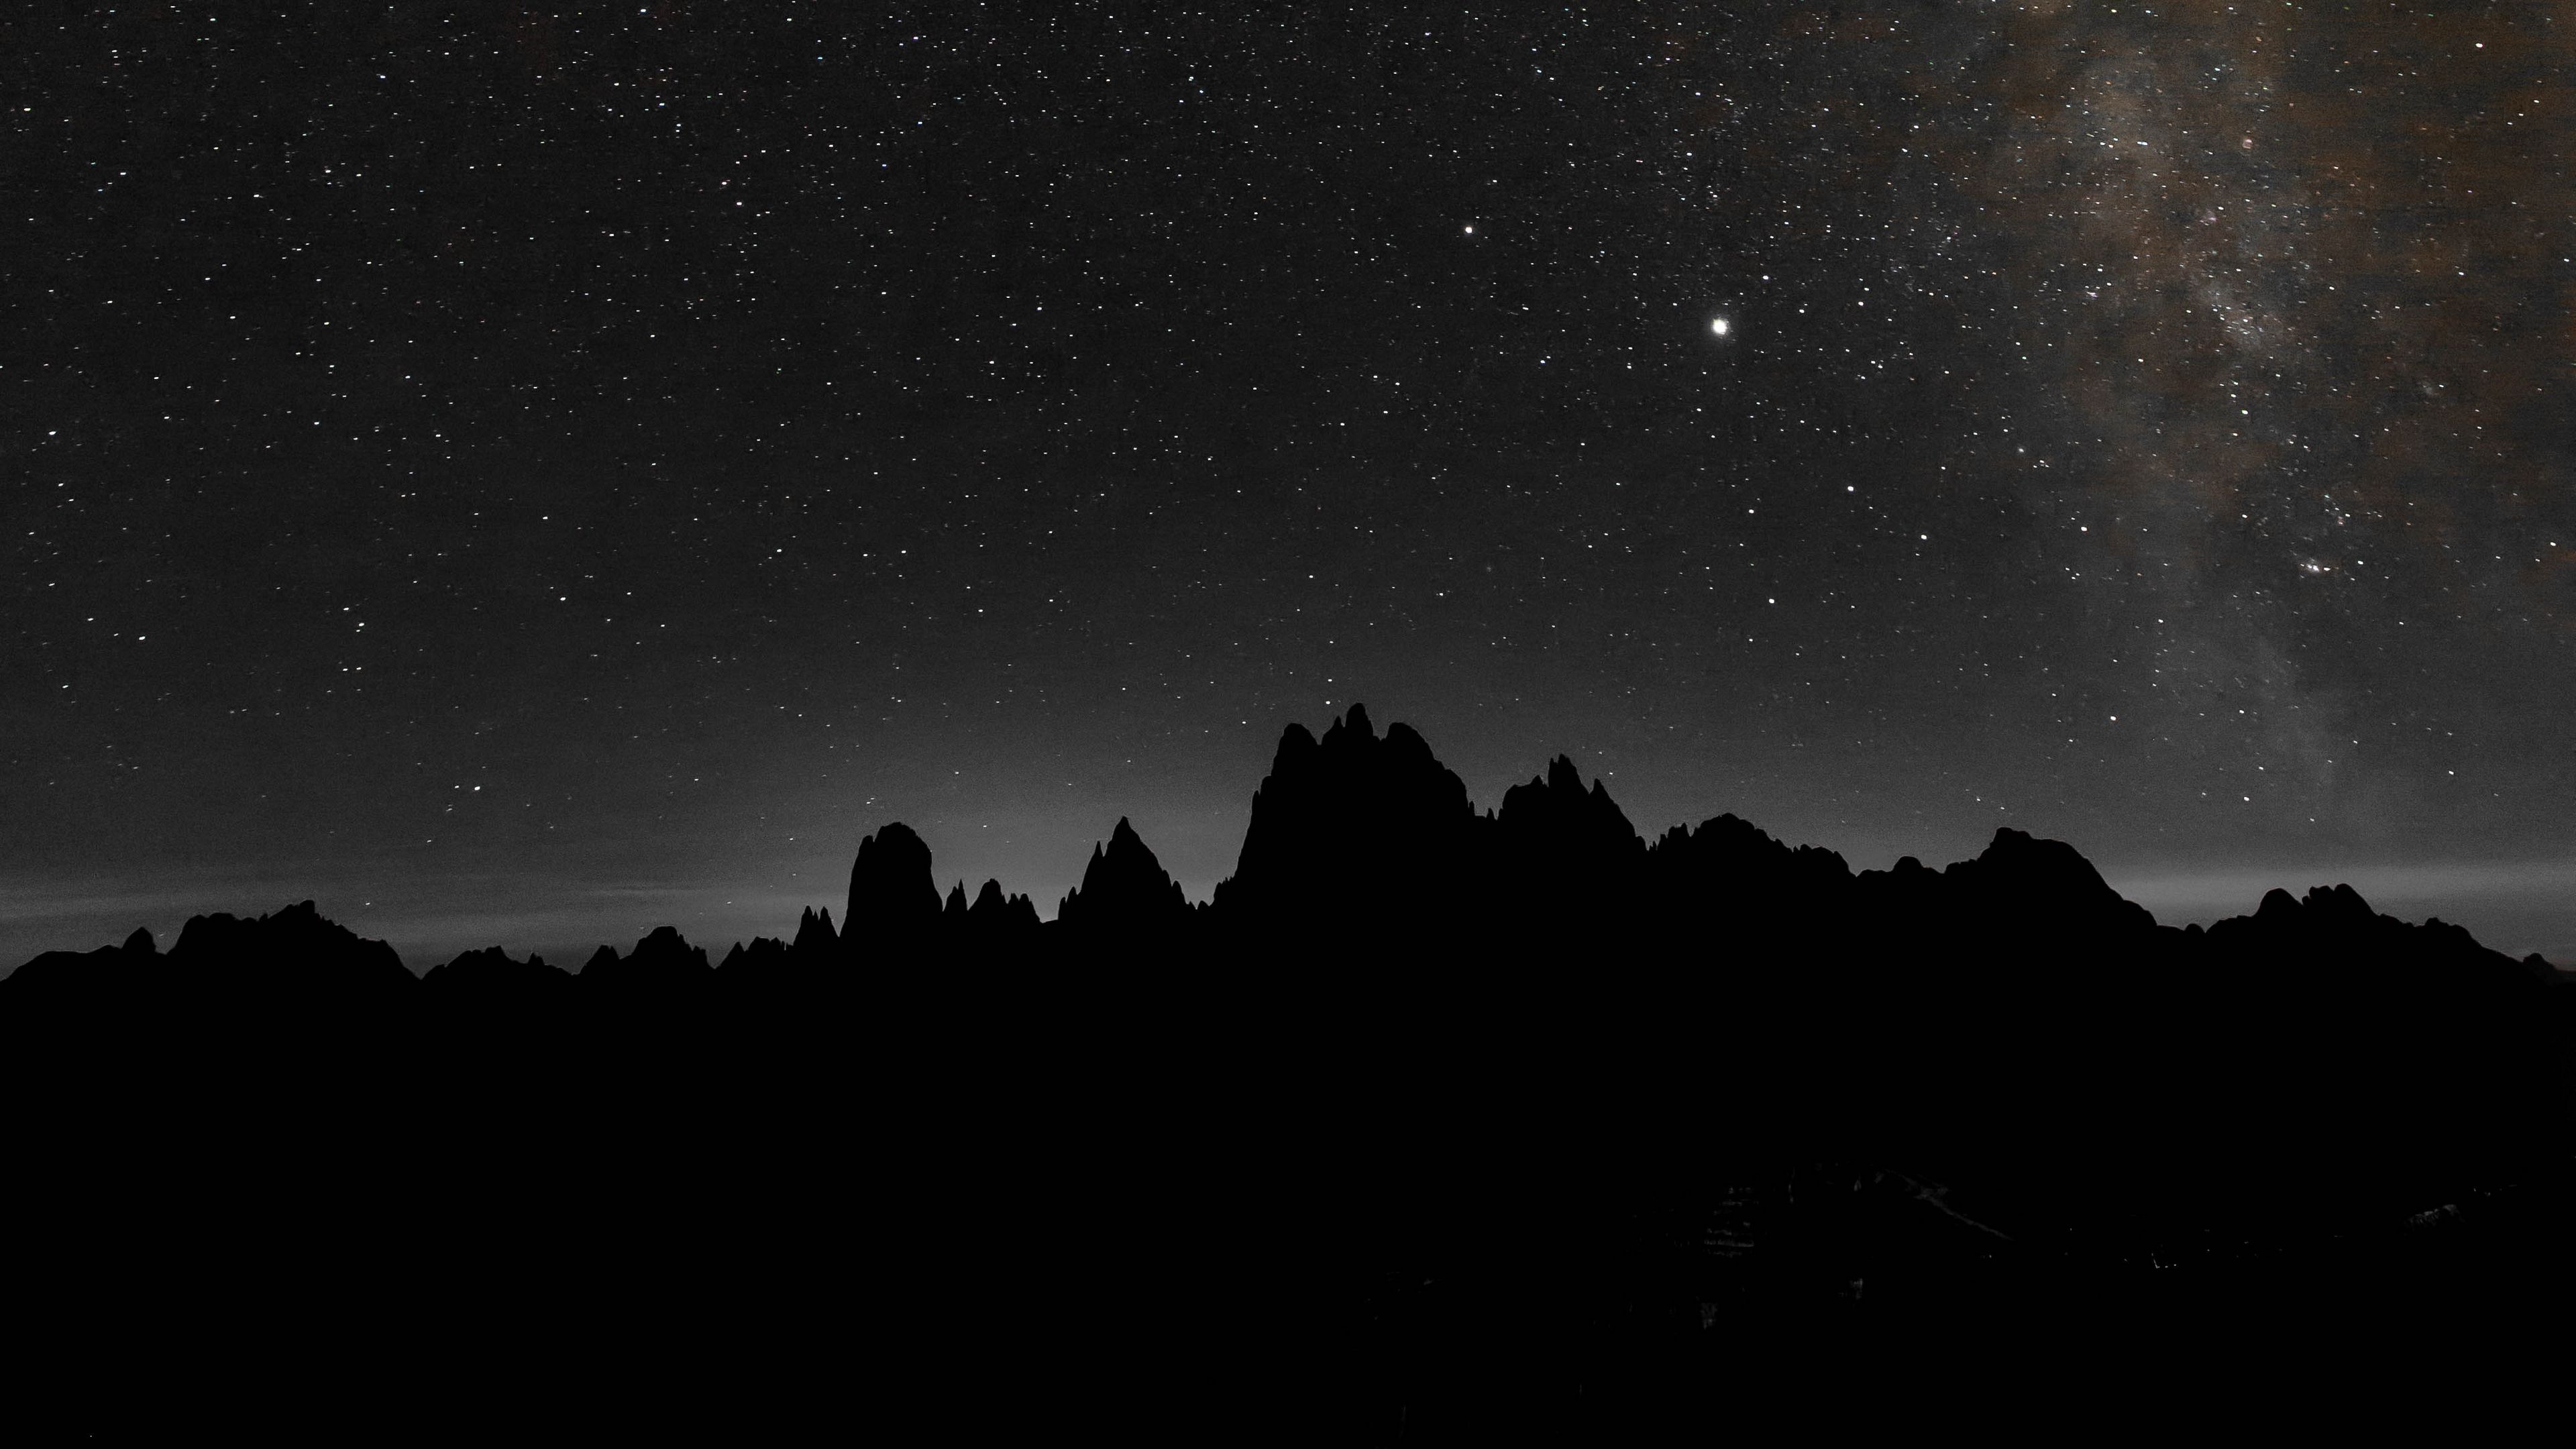 Download wallpaper 3840x2160 starry sky, mountains, outlines, night, dark, darkness  4k uhd 16:9 hd background